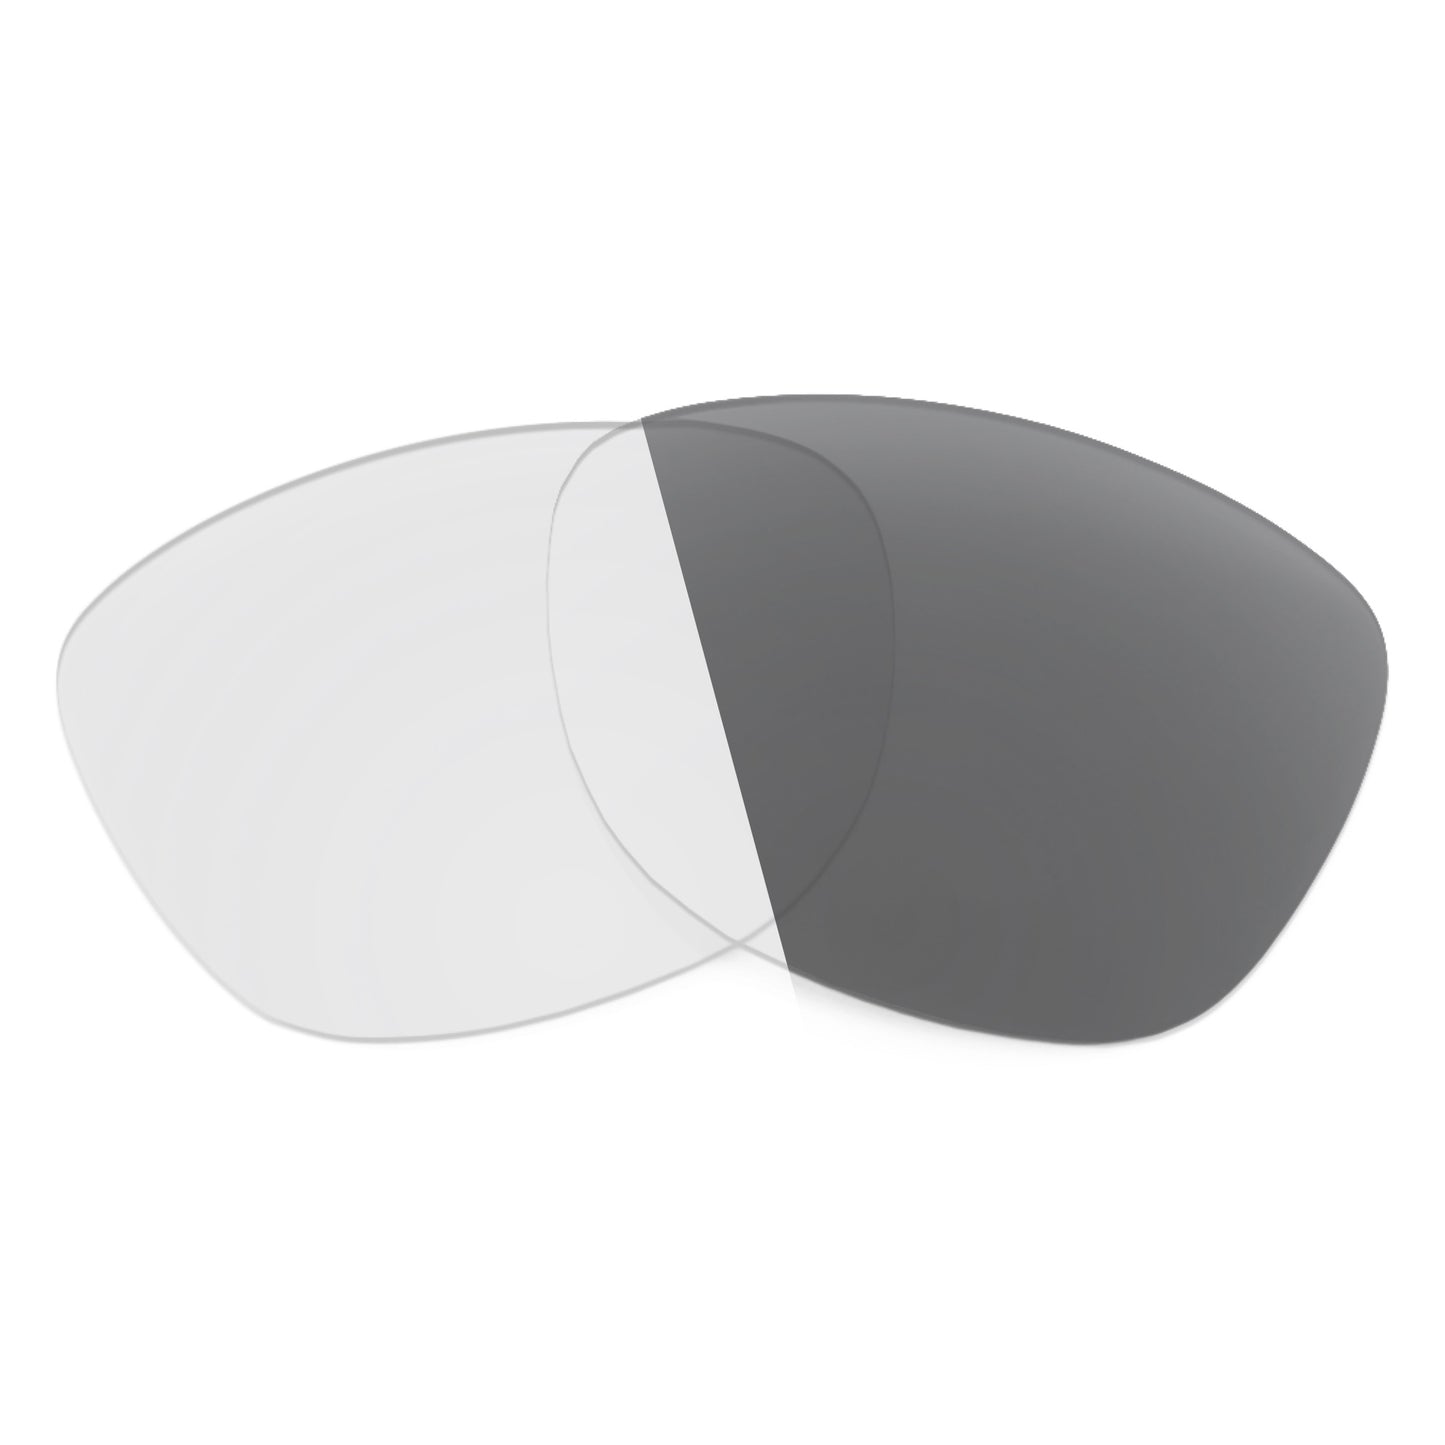 Revant replacement lenses for Ray-Ban RB4278 51mm Non-Polarized Adapt Gray Photochromic